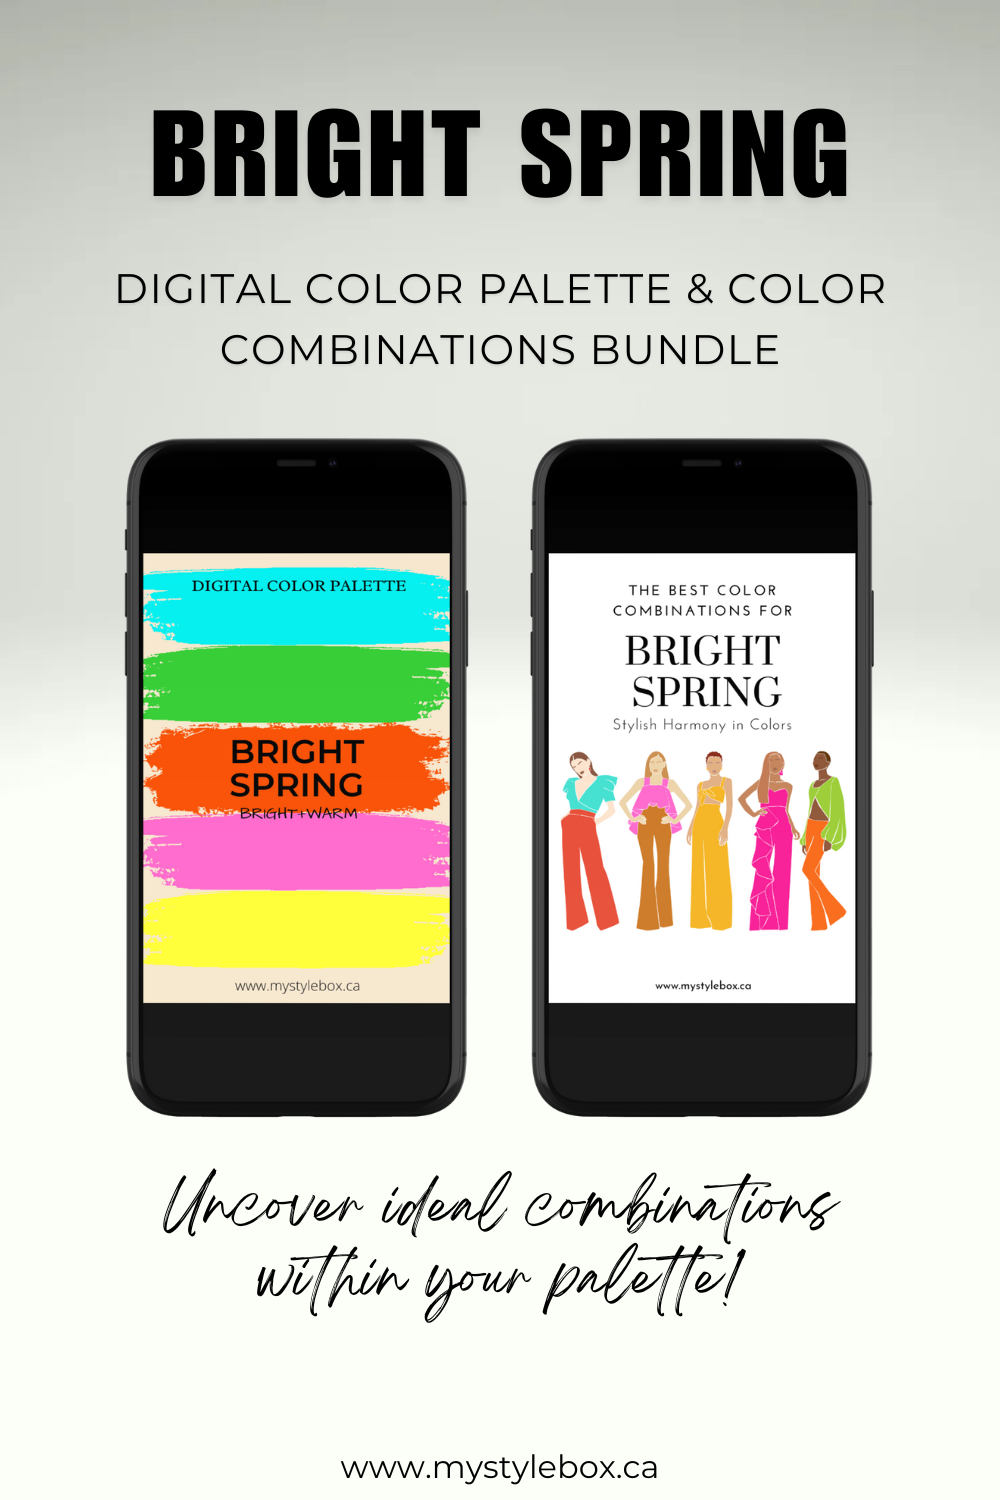 Bright Spring Season Digital Color Palette and Color Combinations